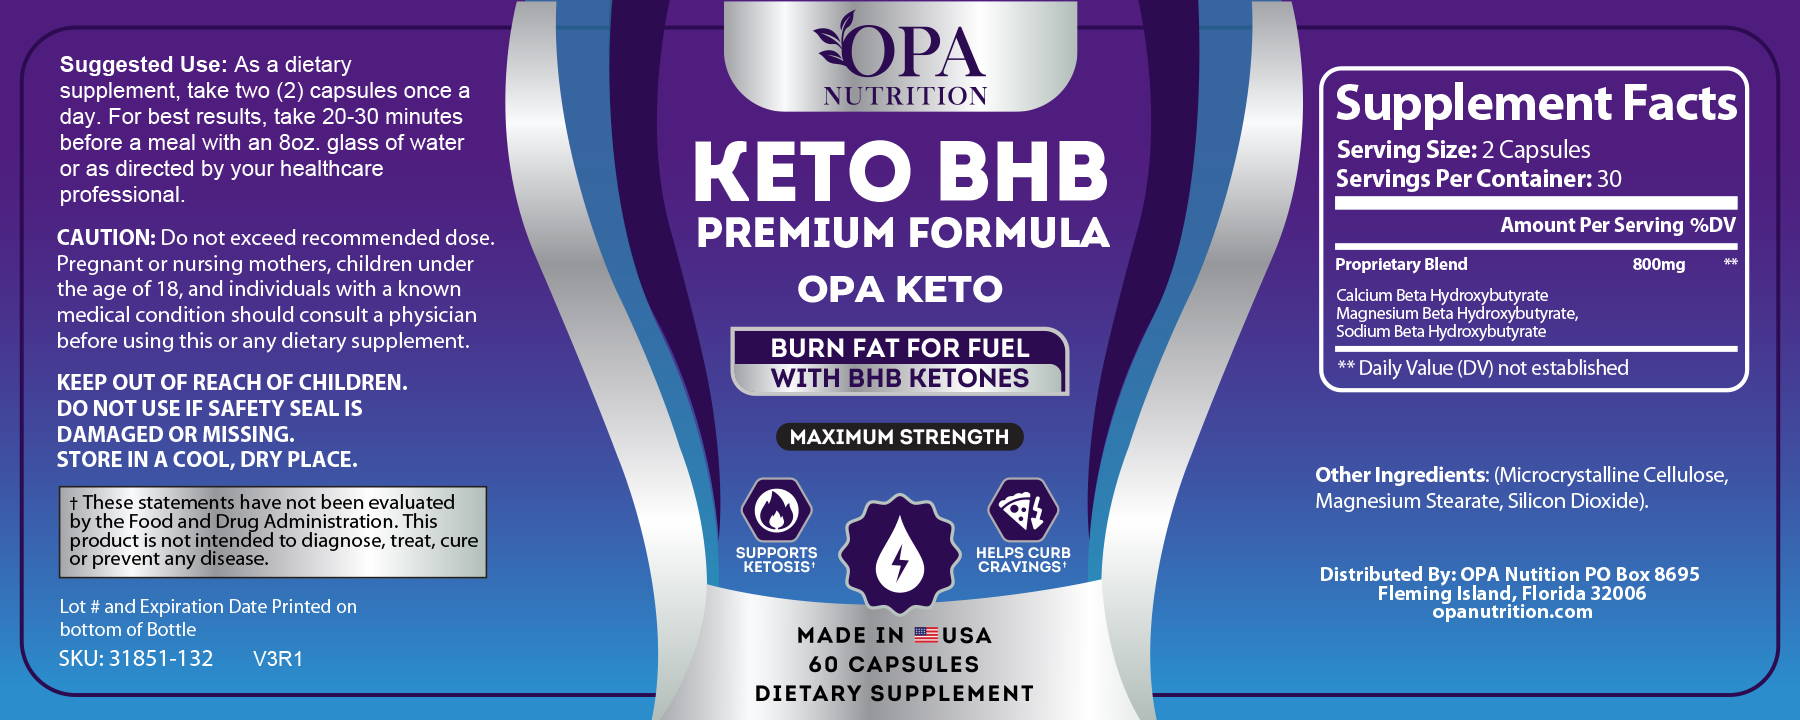 OPA NUTRITION KETO BHB SALT PILLS LABELS and DIRECTIONS